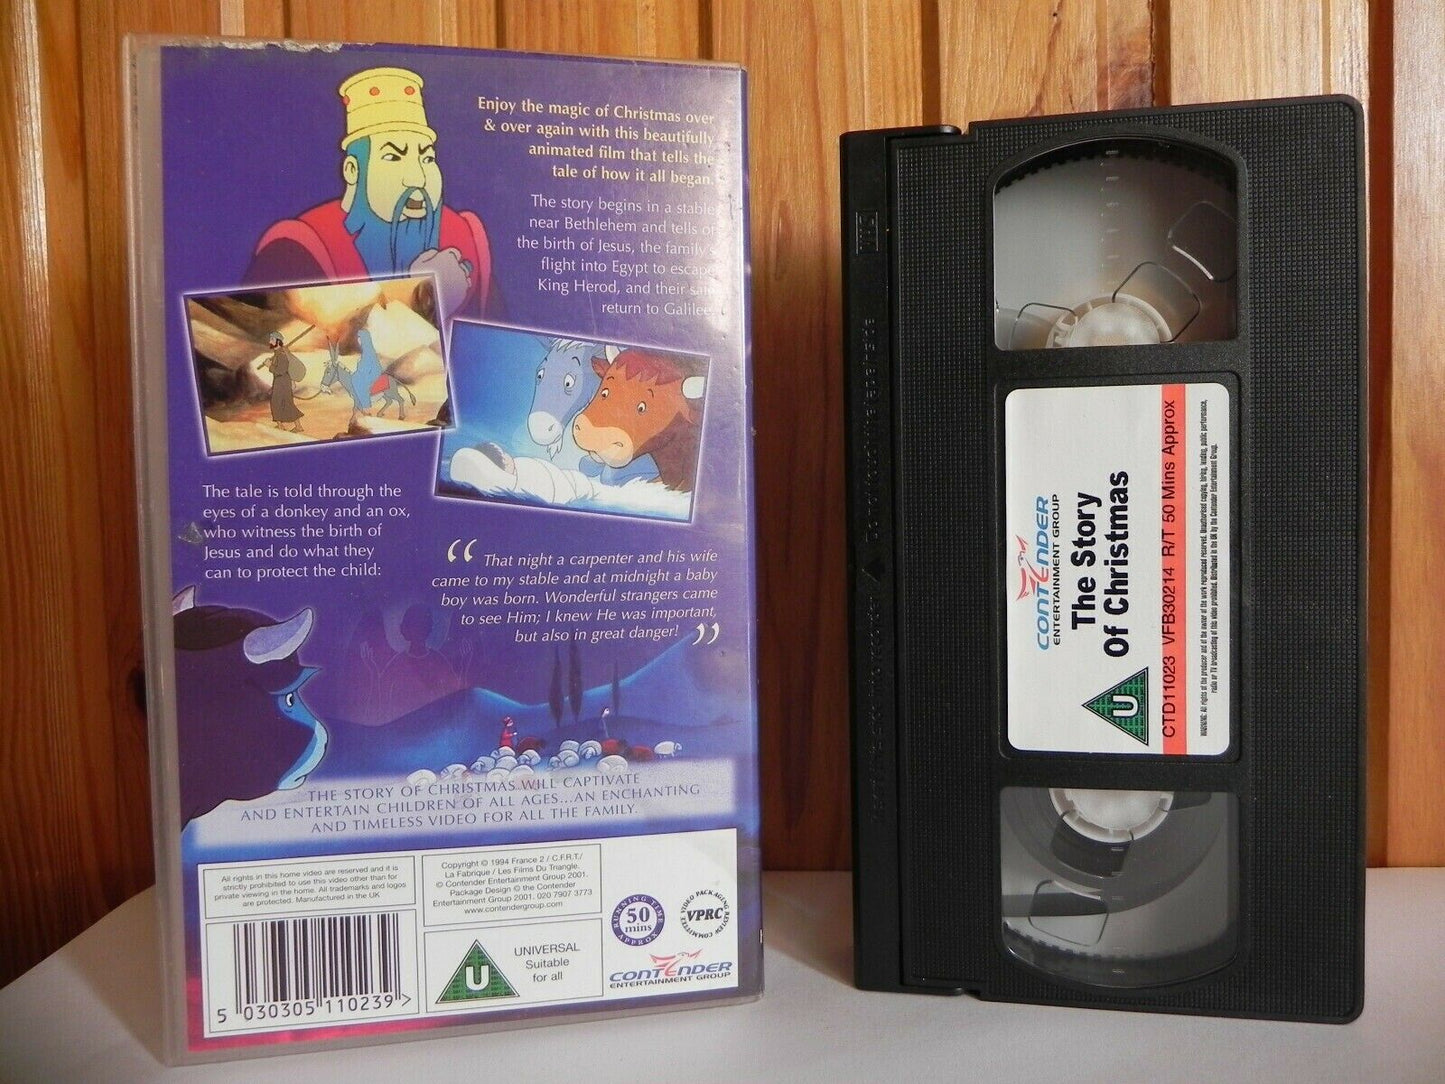 The Story Of Christmas - Animated Magic Story - Digitally Remastred - Pal VHS-